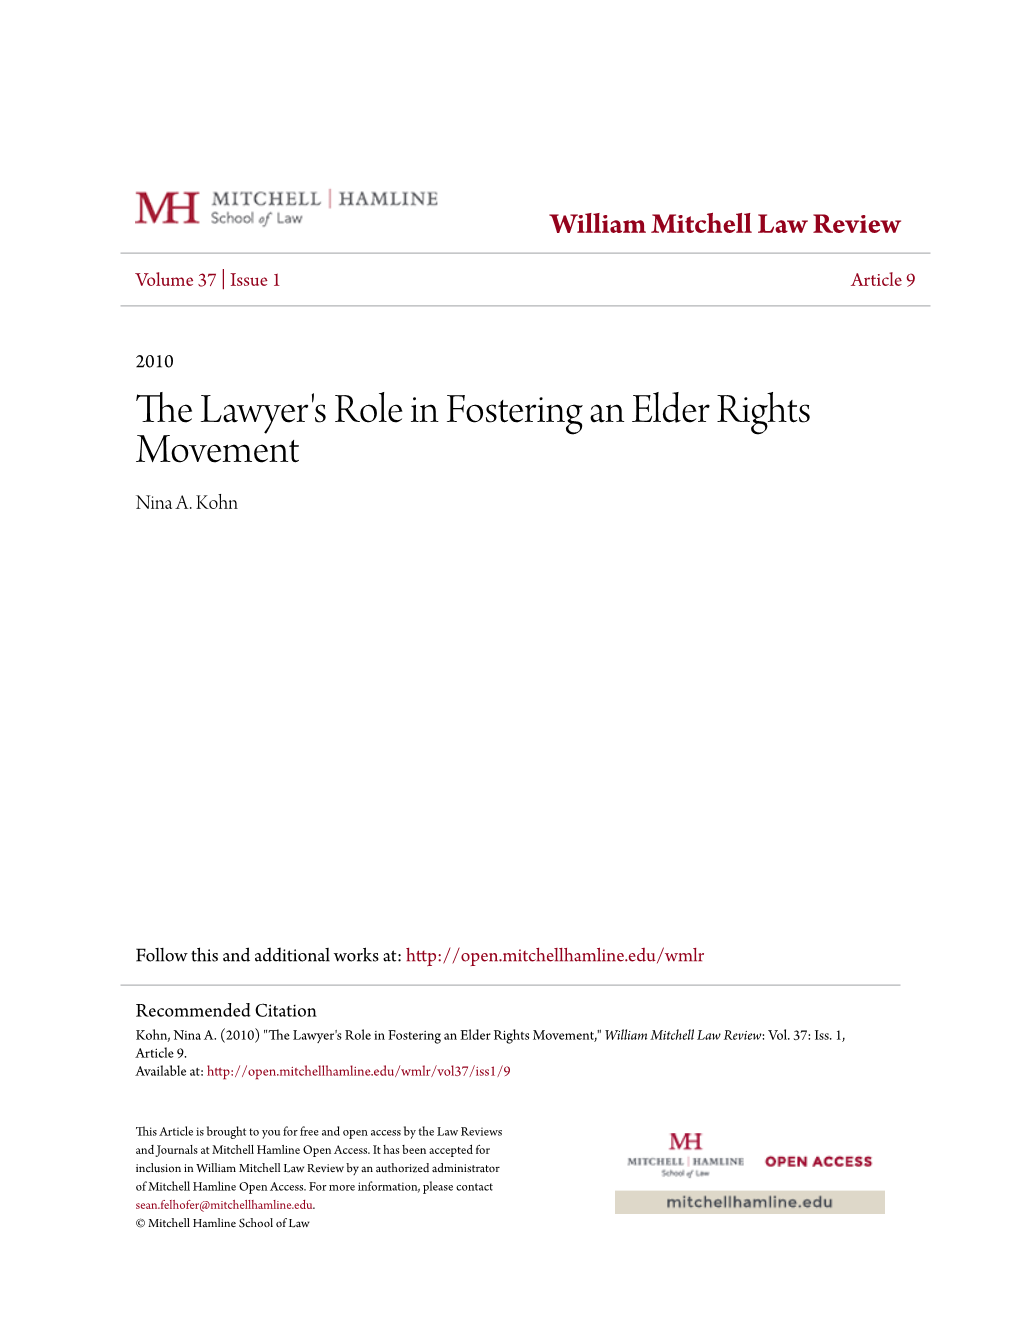 The Lawyer's Role in Fostering an Elder Rights Movement Nina A